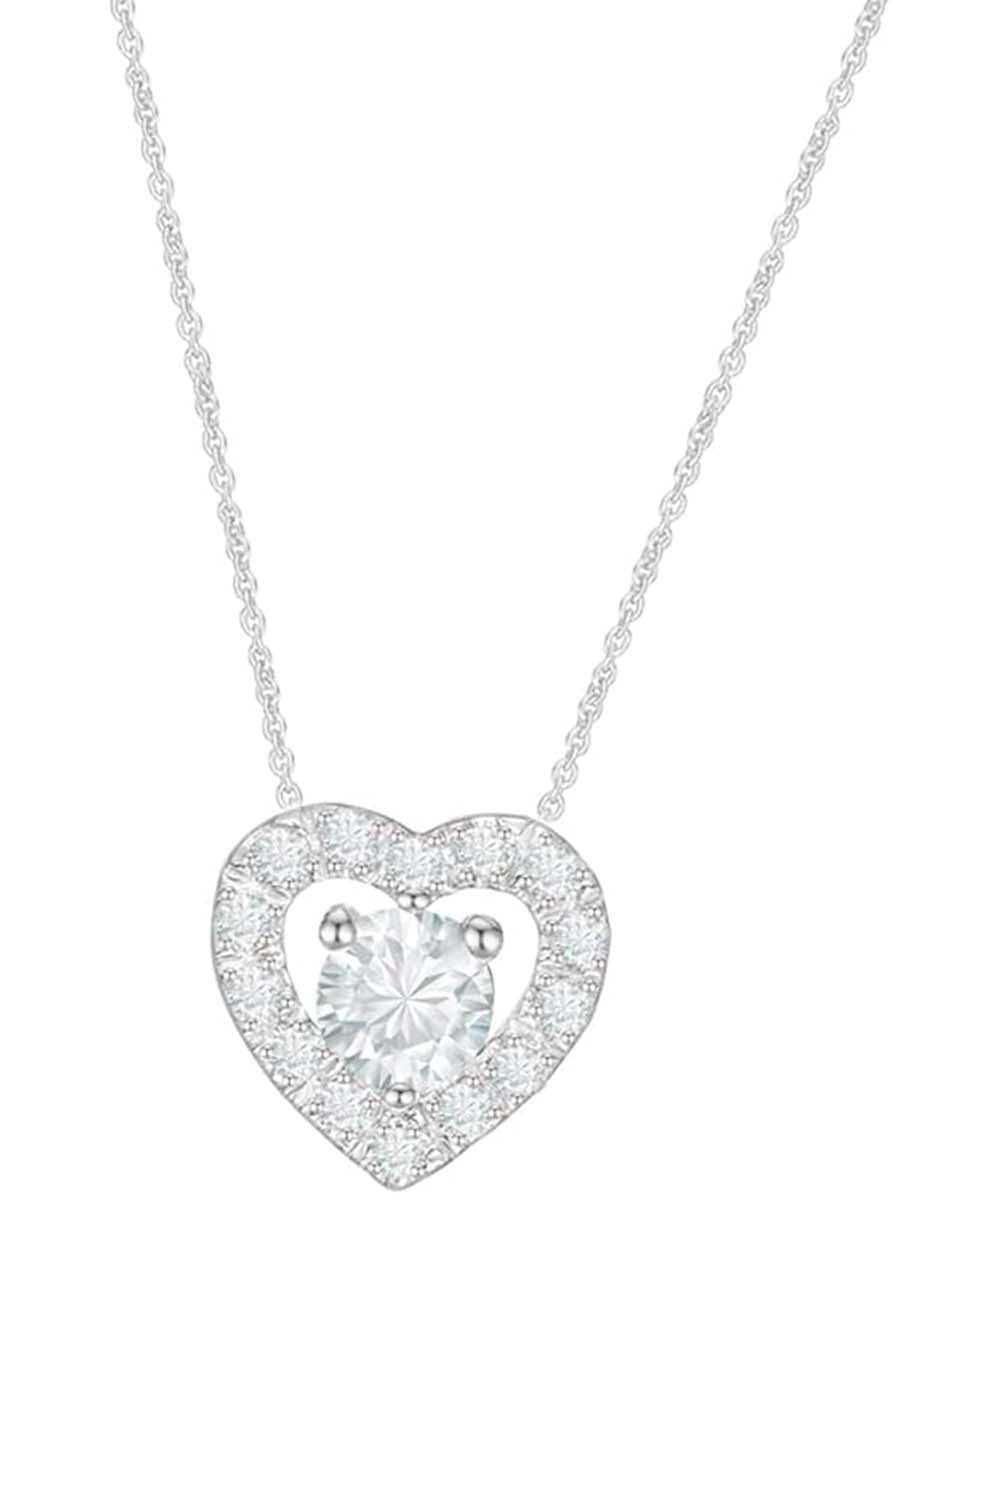 White Gold Color Round Solitaire Moissanite Halo Heart Pendant Necklace